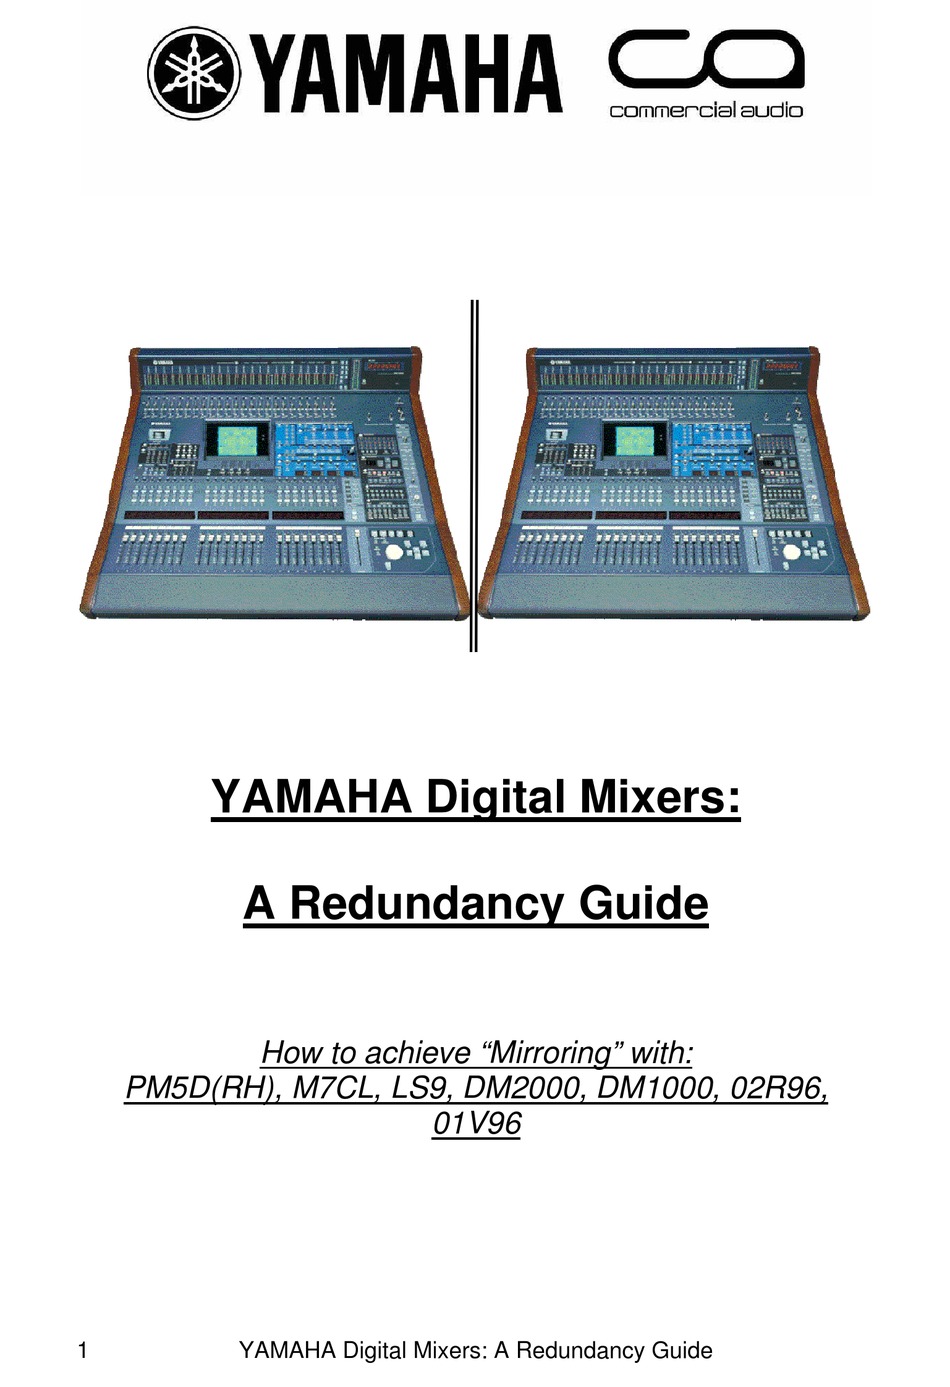 yamaha studio manager sync ls9 with computer wireless